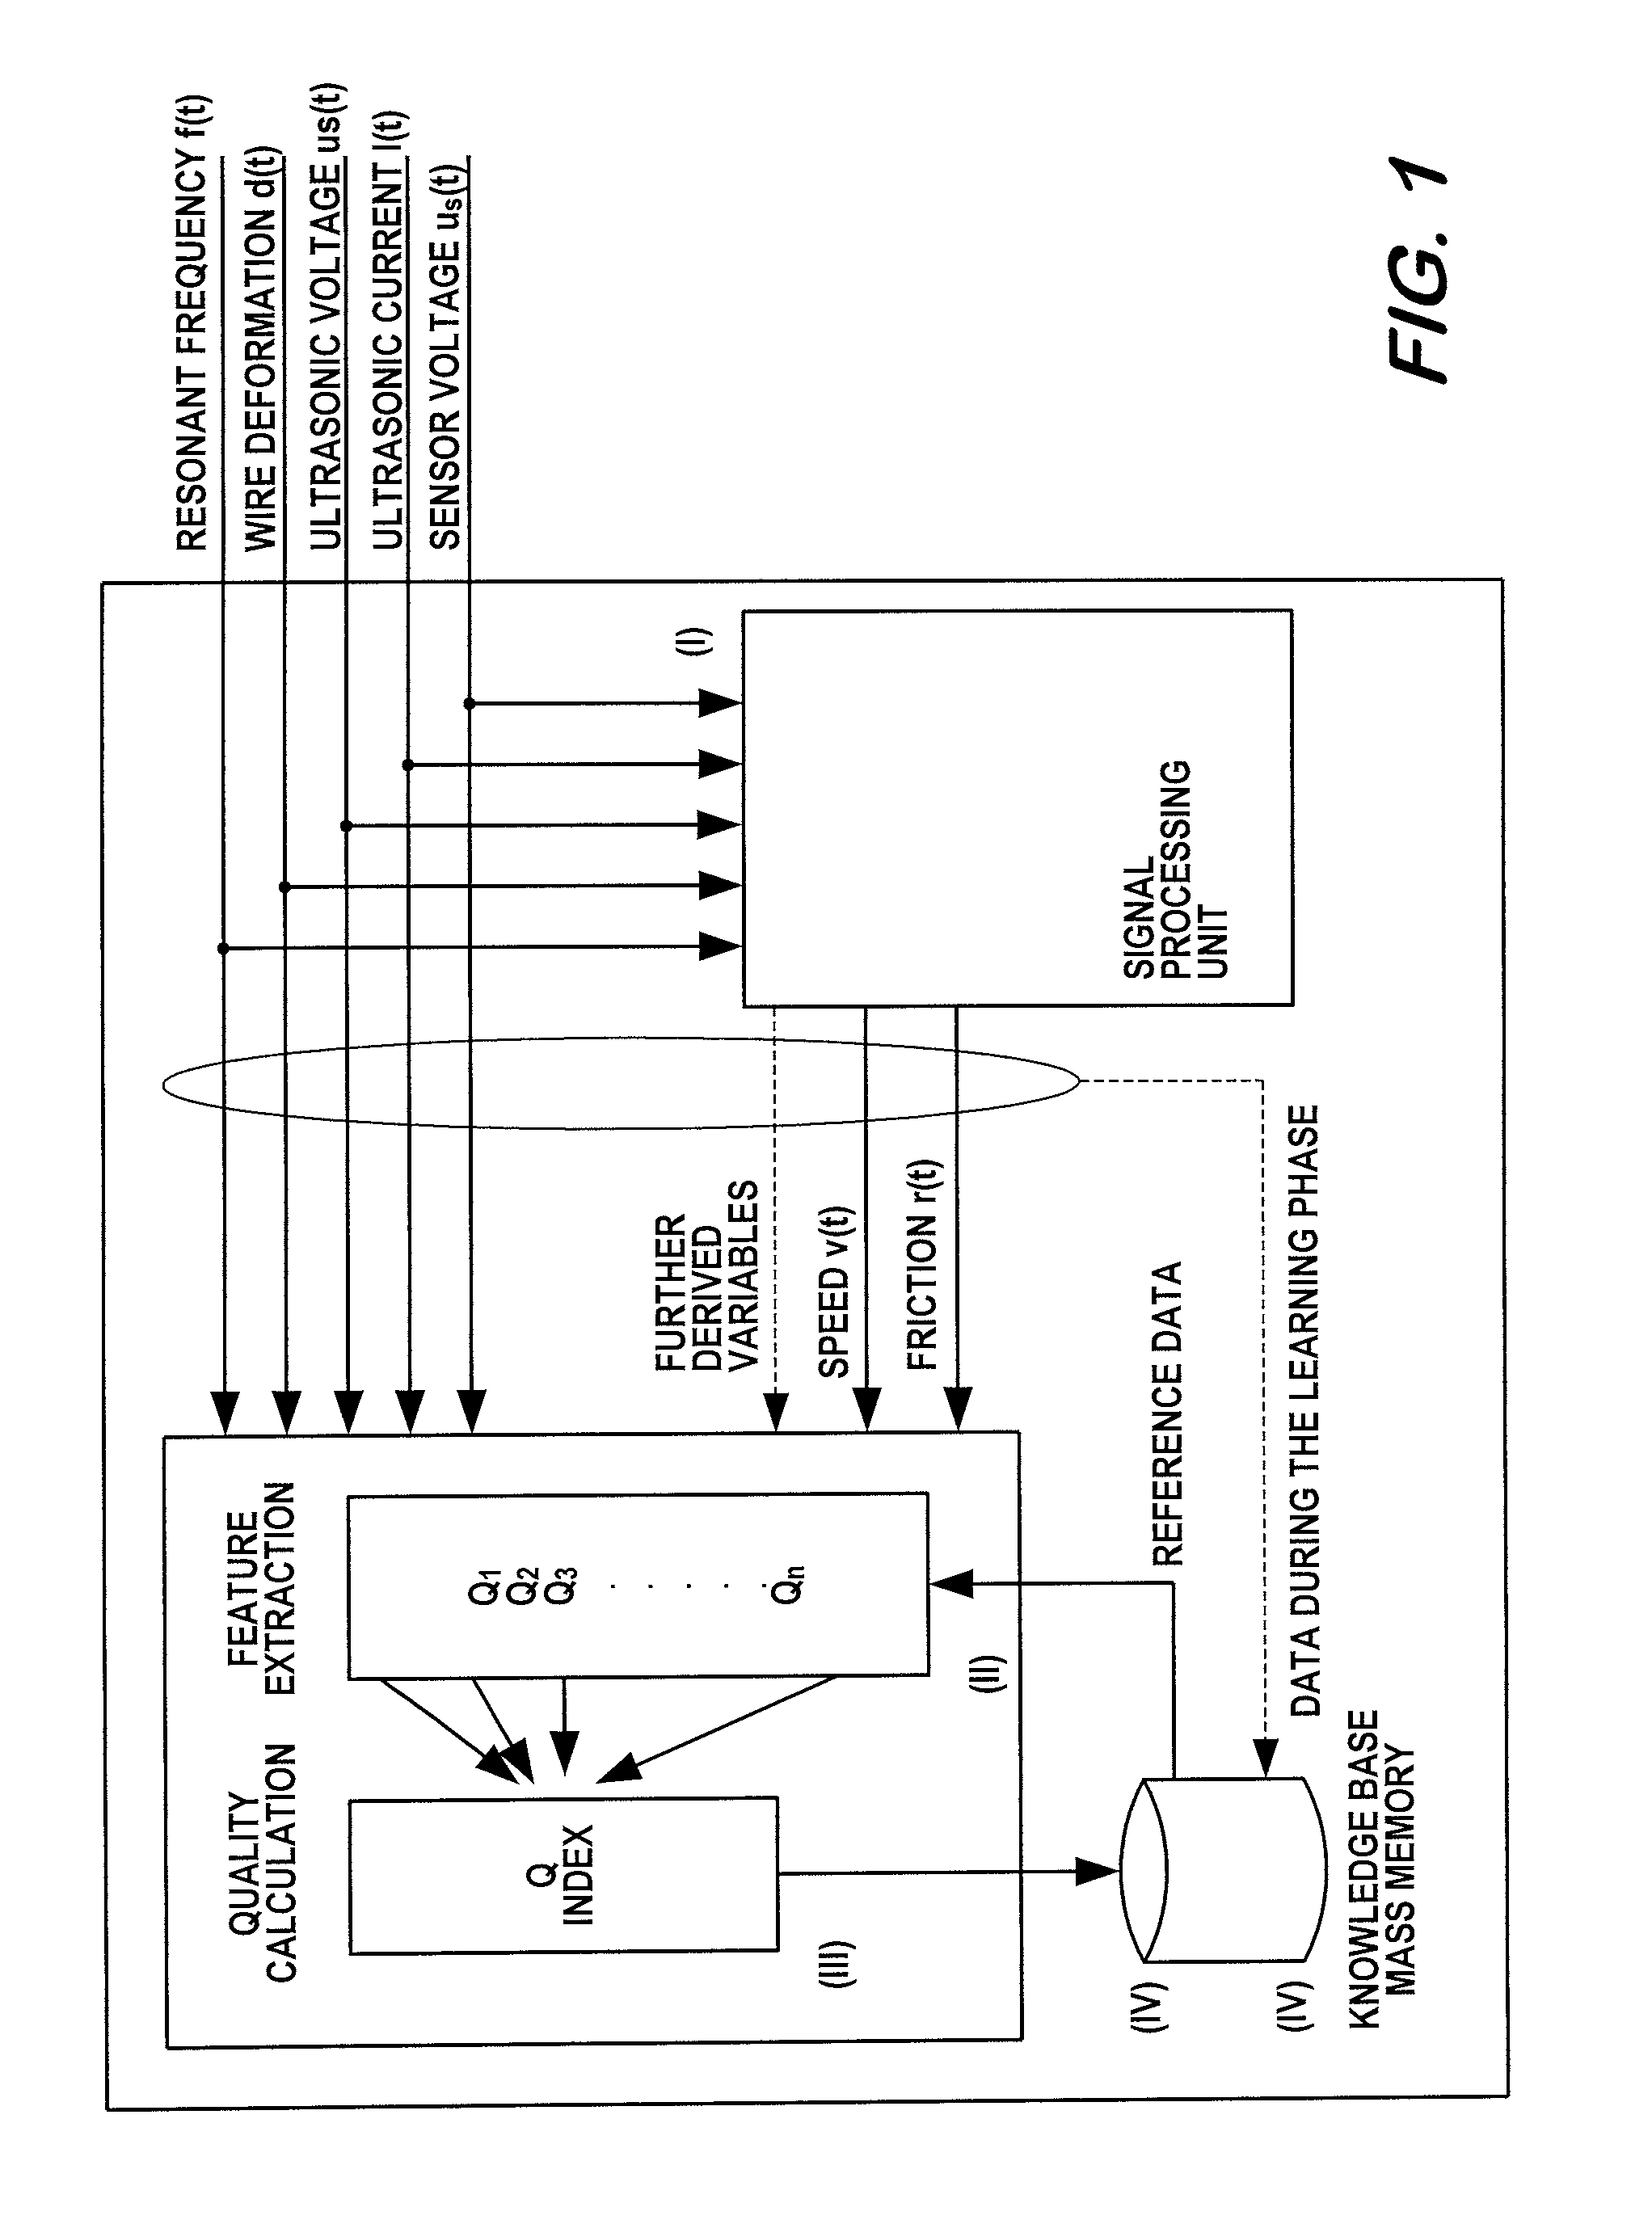 Method for quality control during ultrasonic